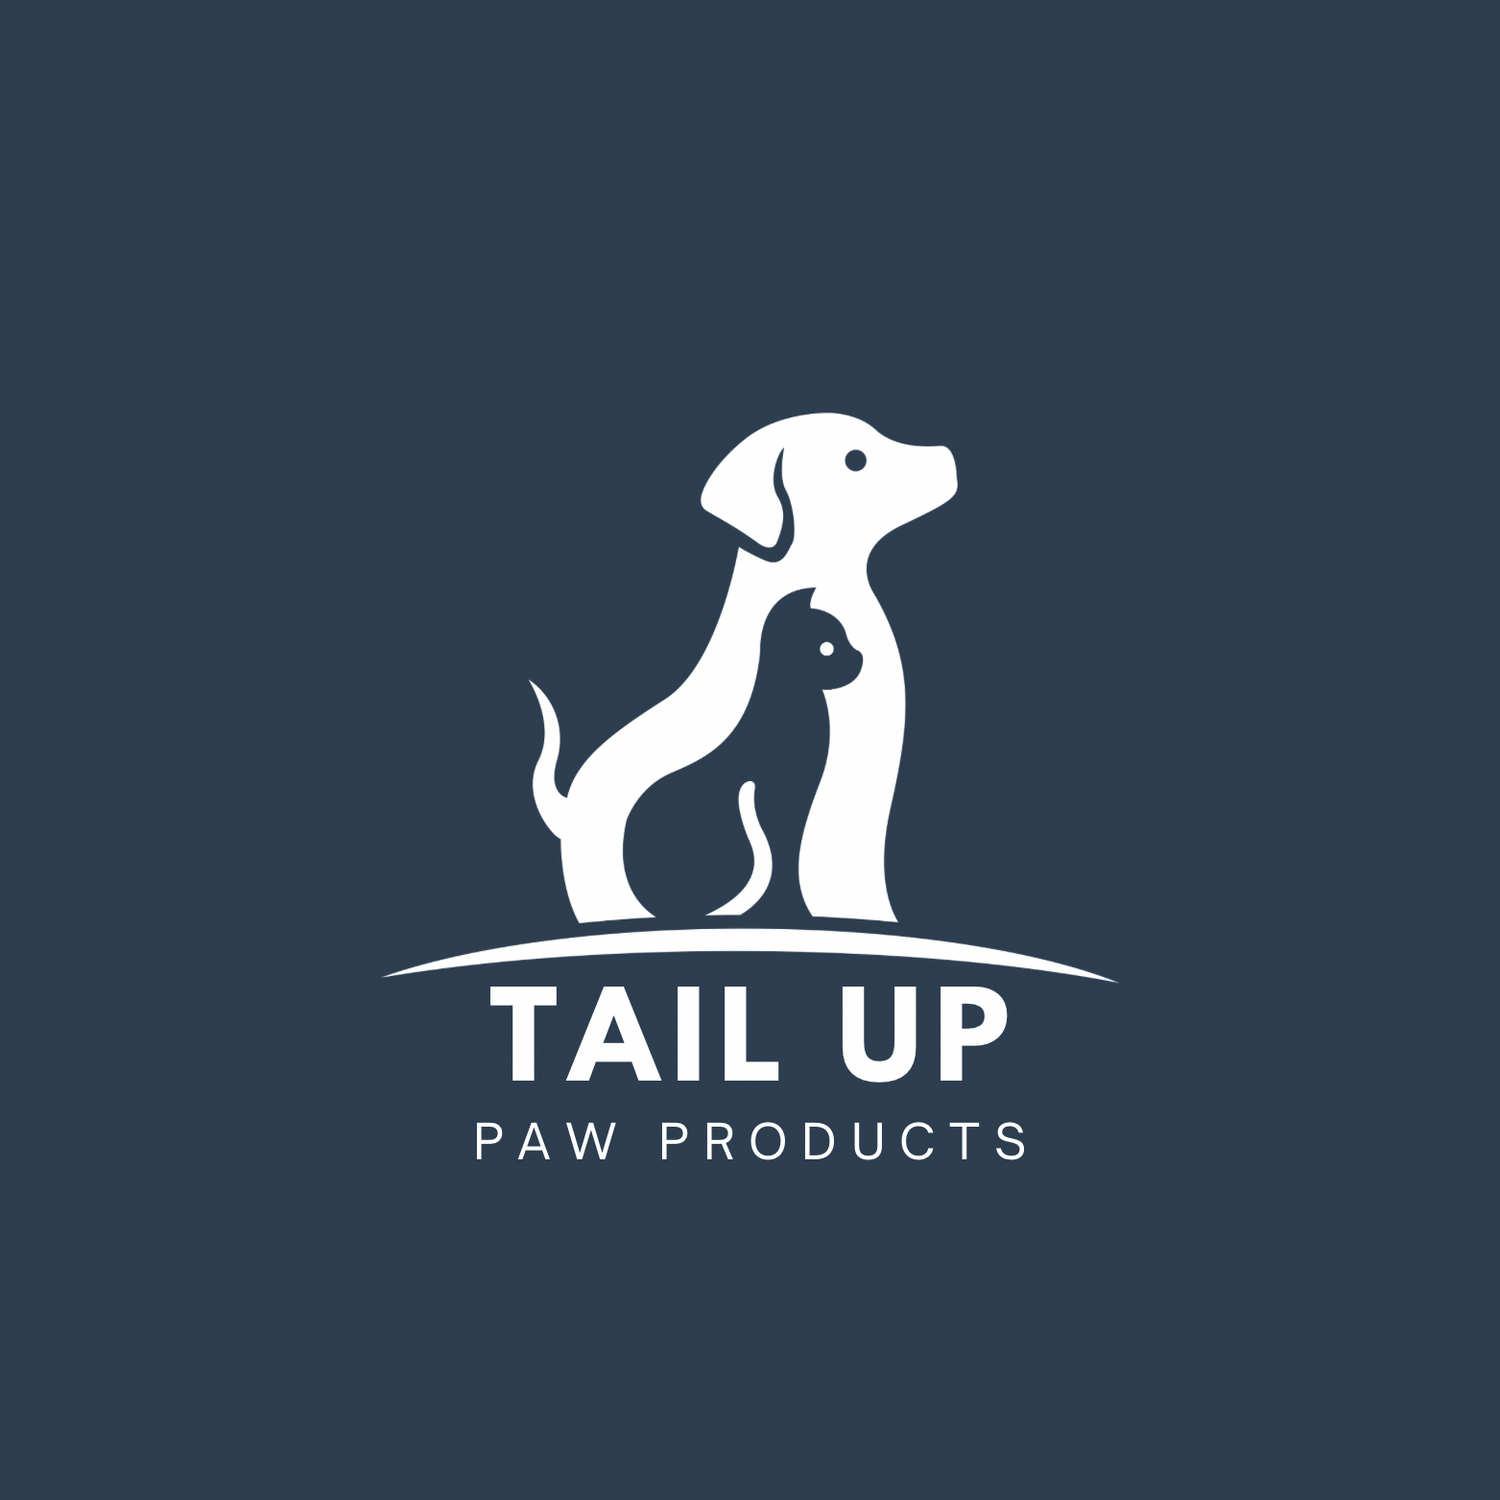 Tail Up Paw Products